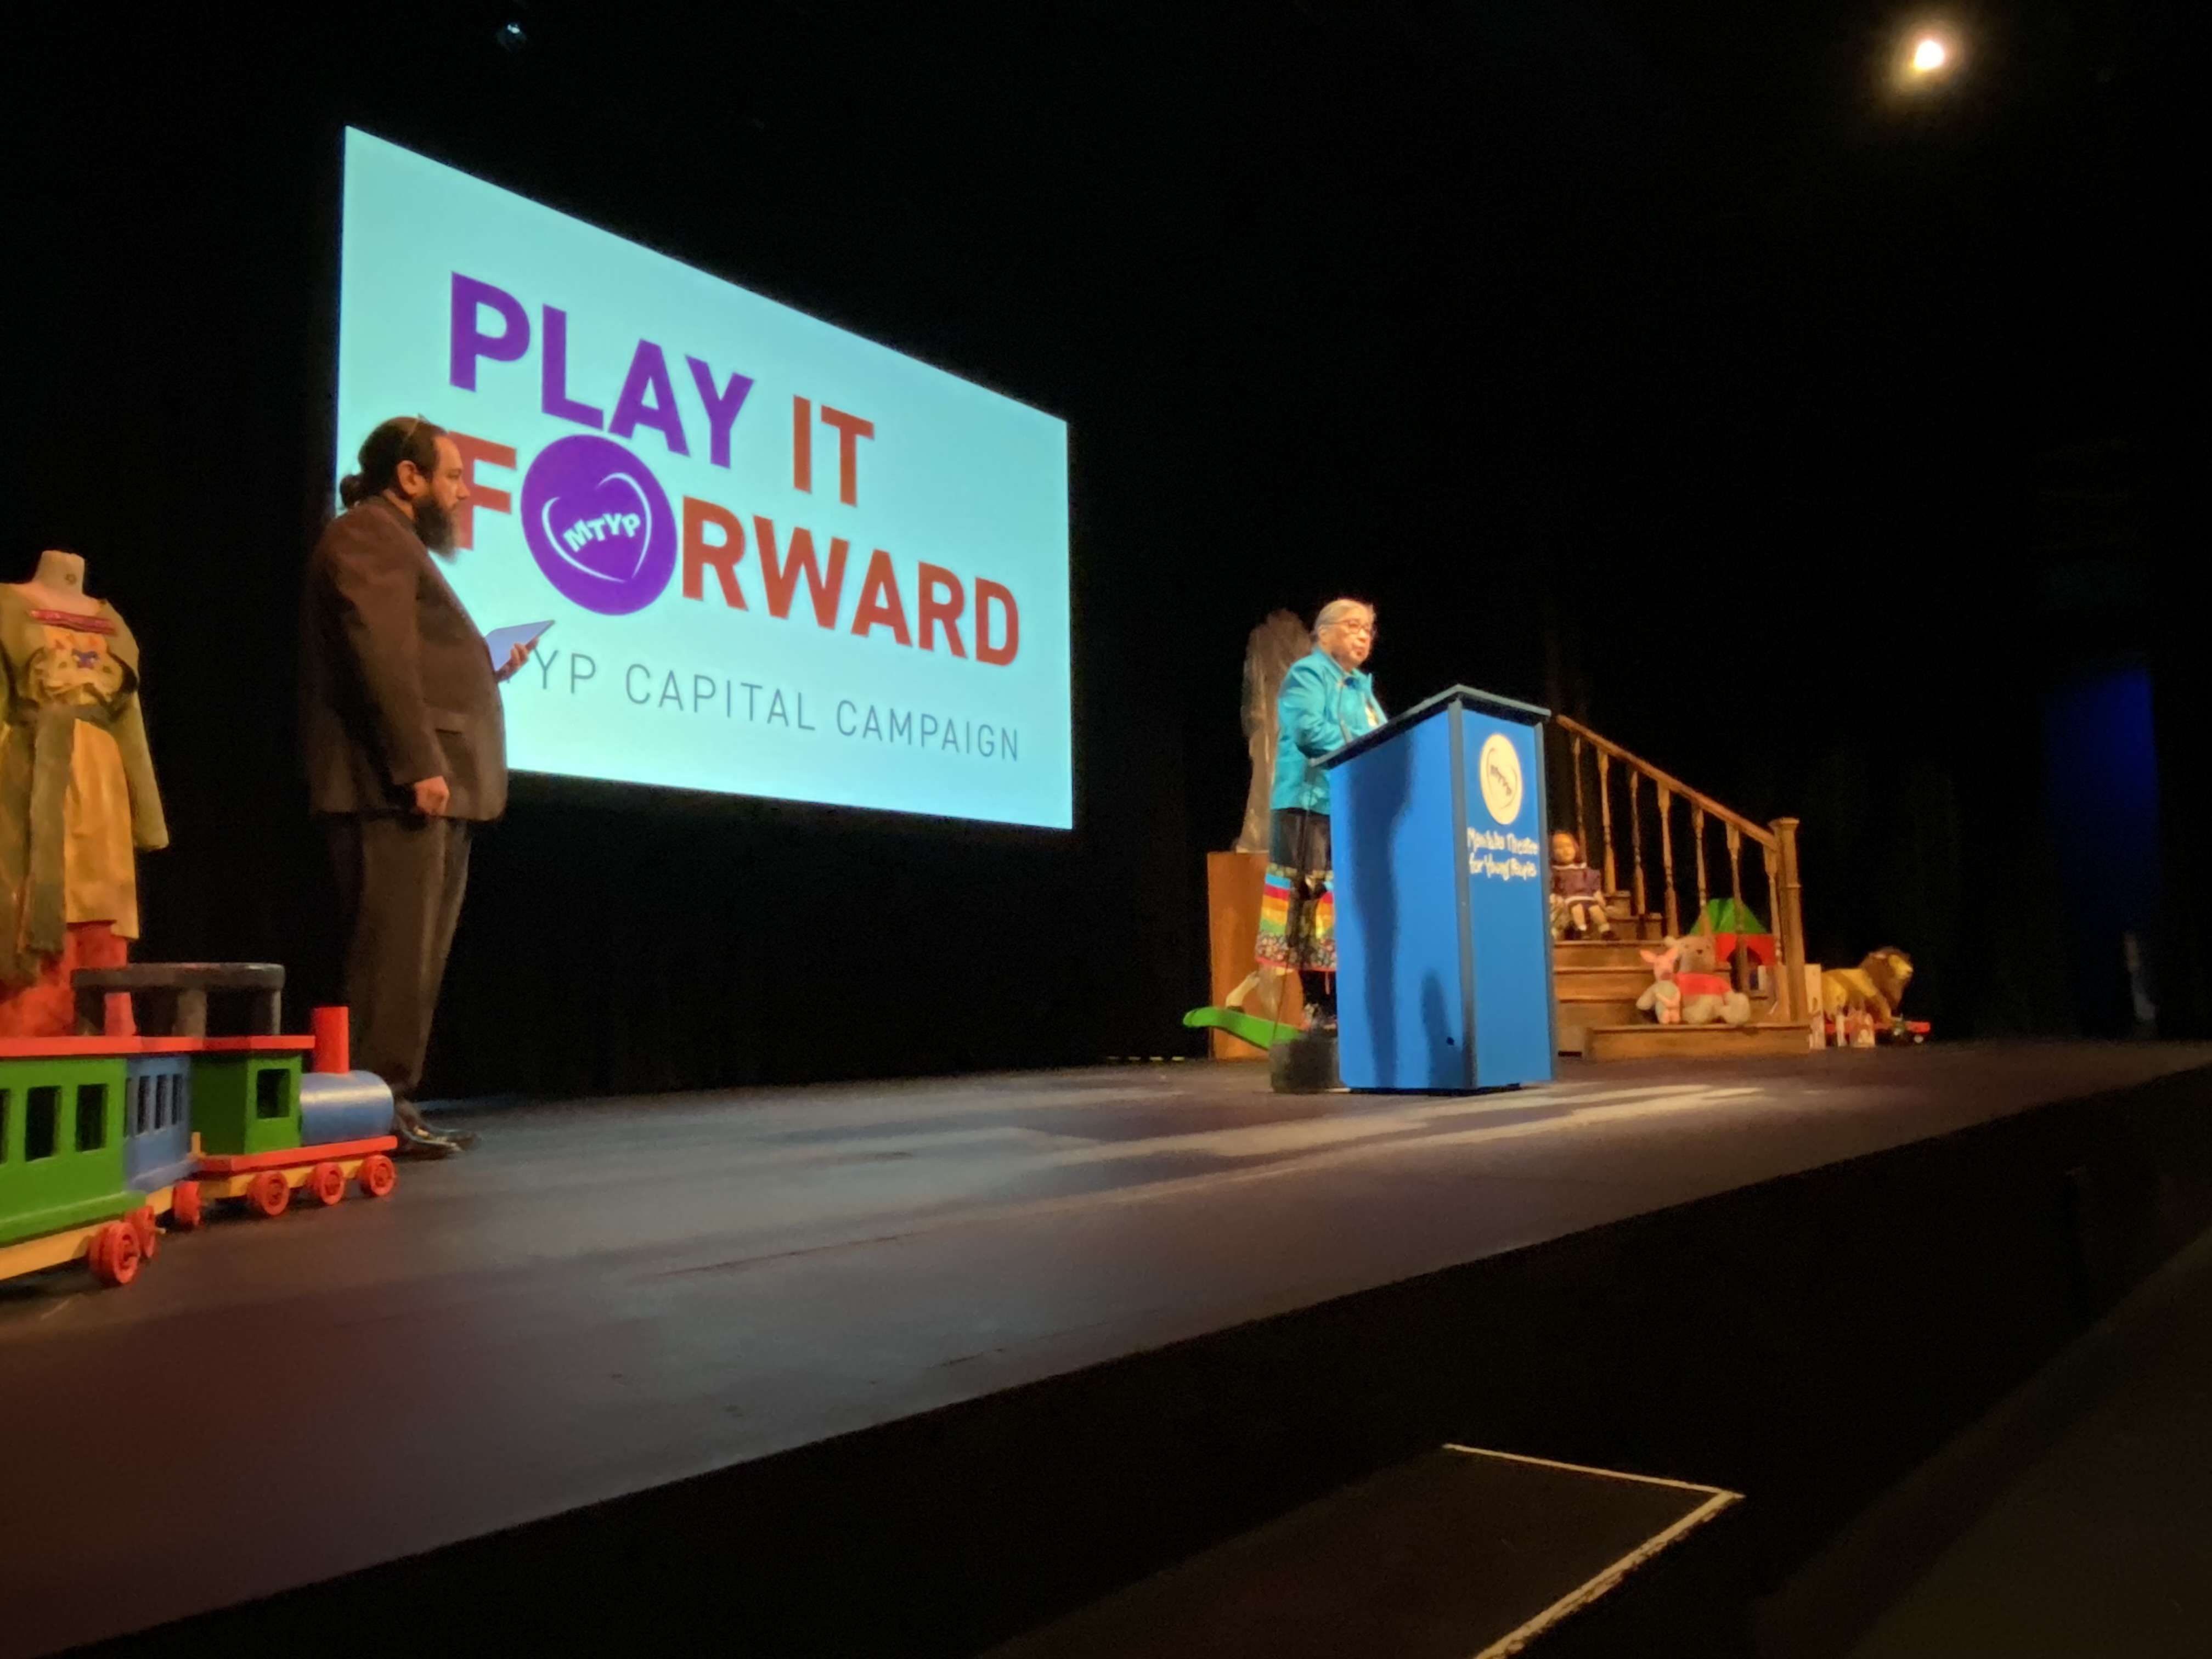 ‘Play it forward’: Manitoba Theatre for Young People kicks off fundraising campaign